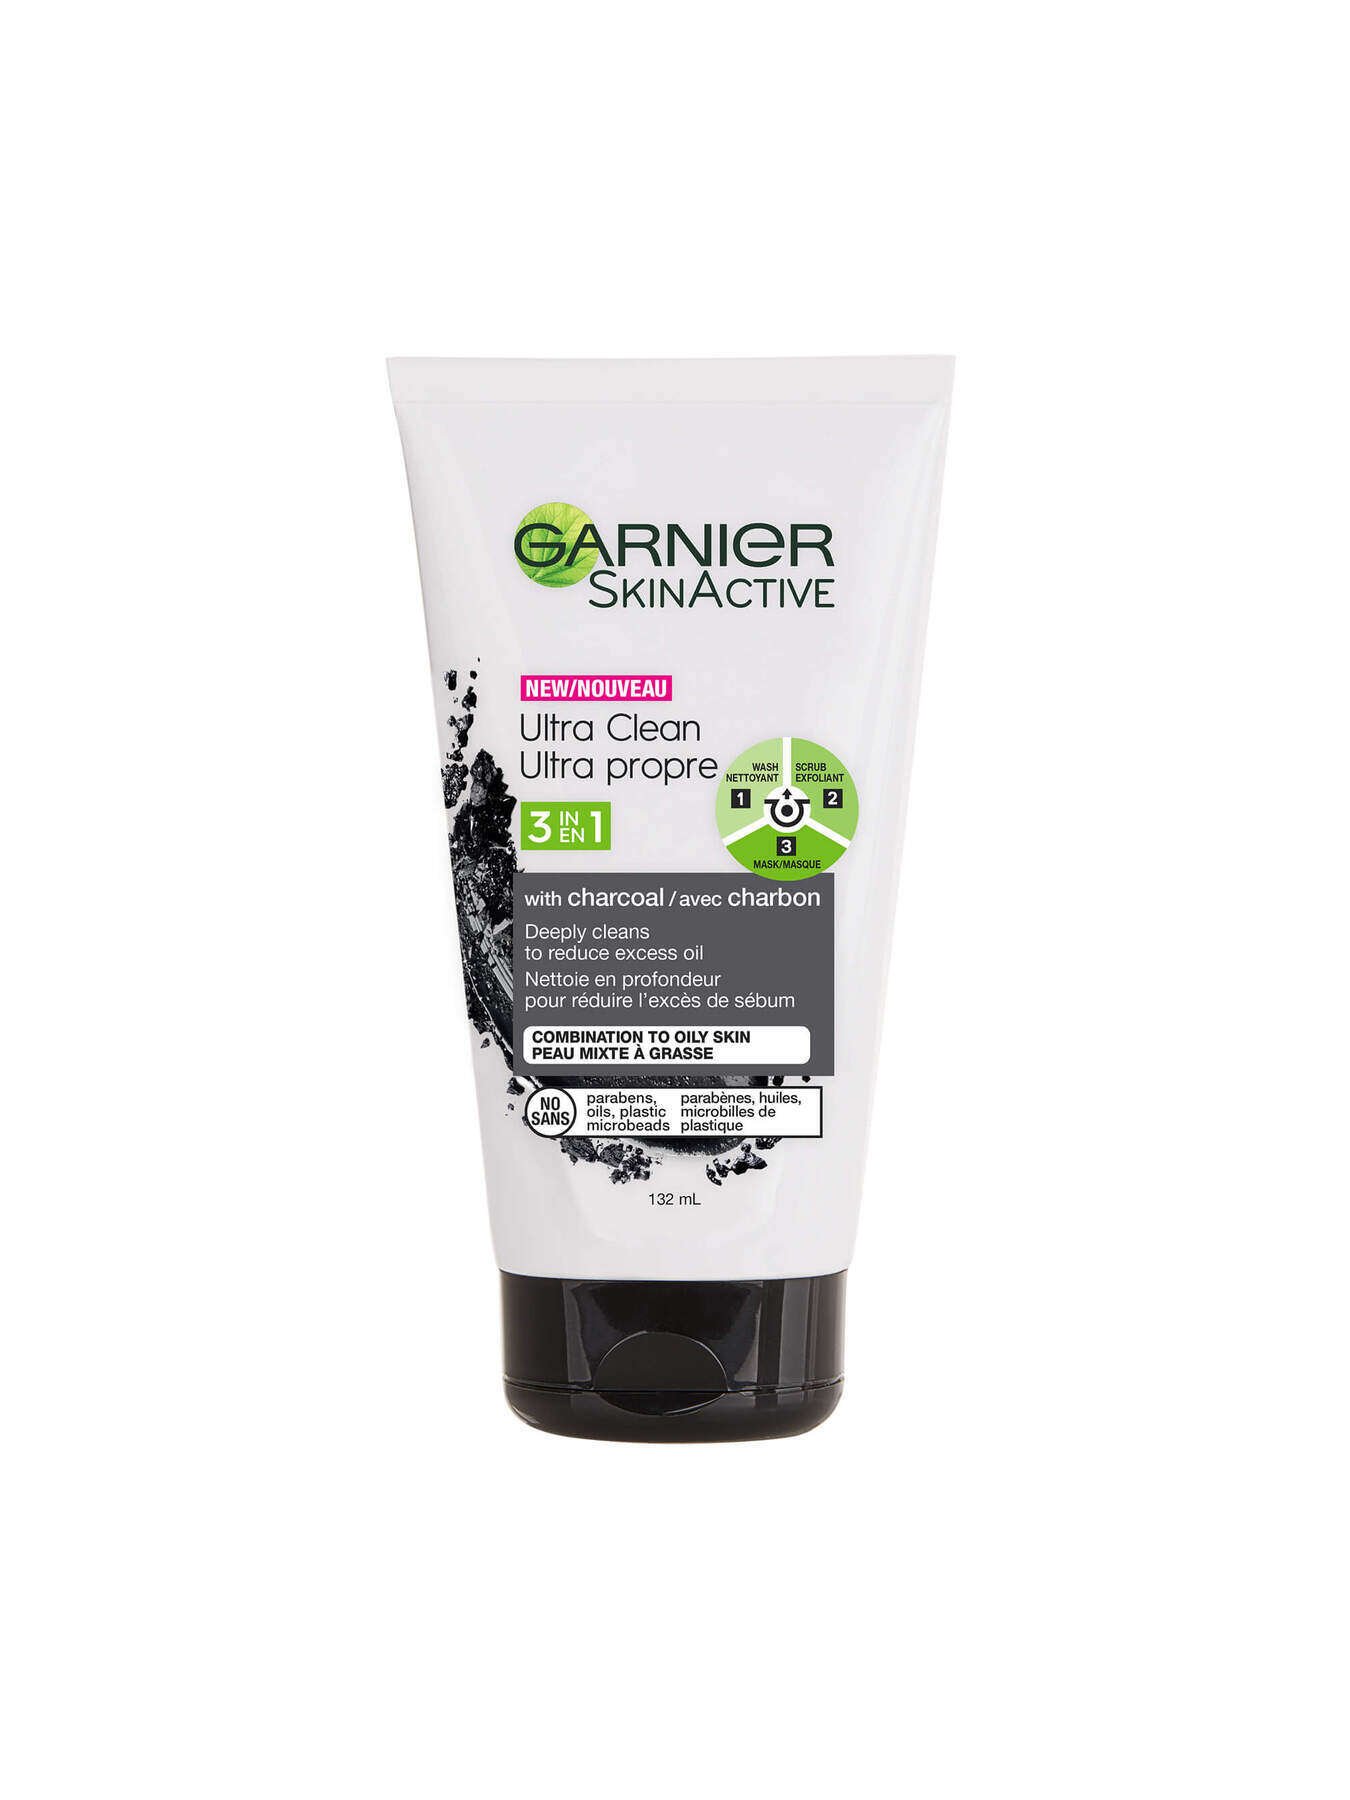 garnier cleanser skinactive ultra clean 3in1 cleanser with charcoal 132 ml 603084547579 t1